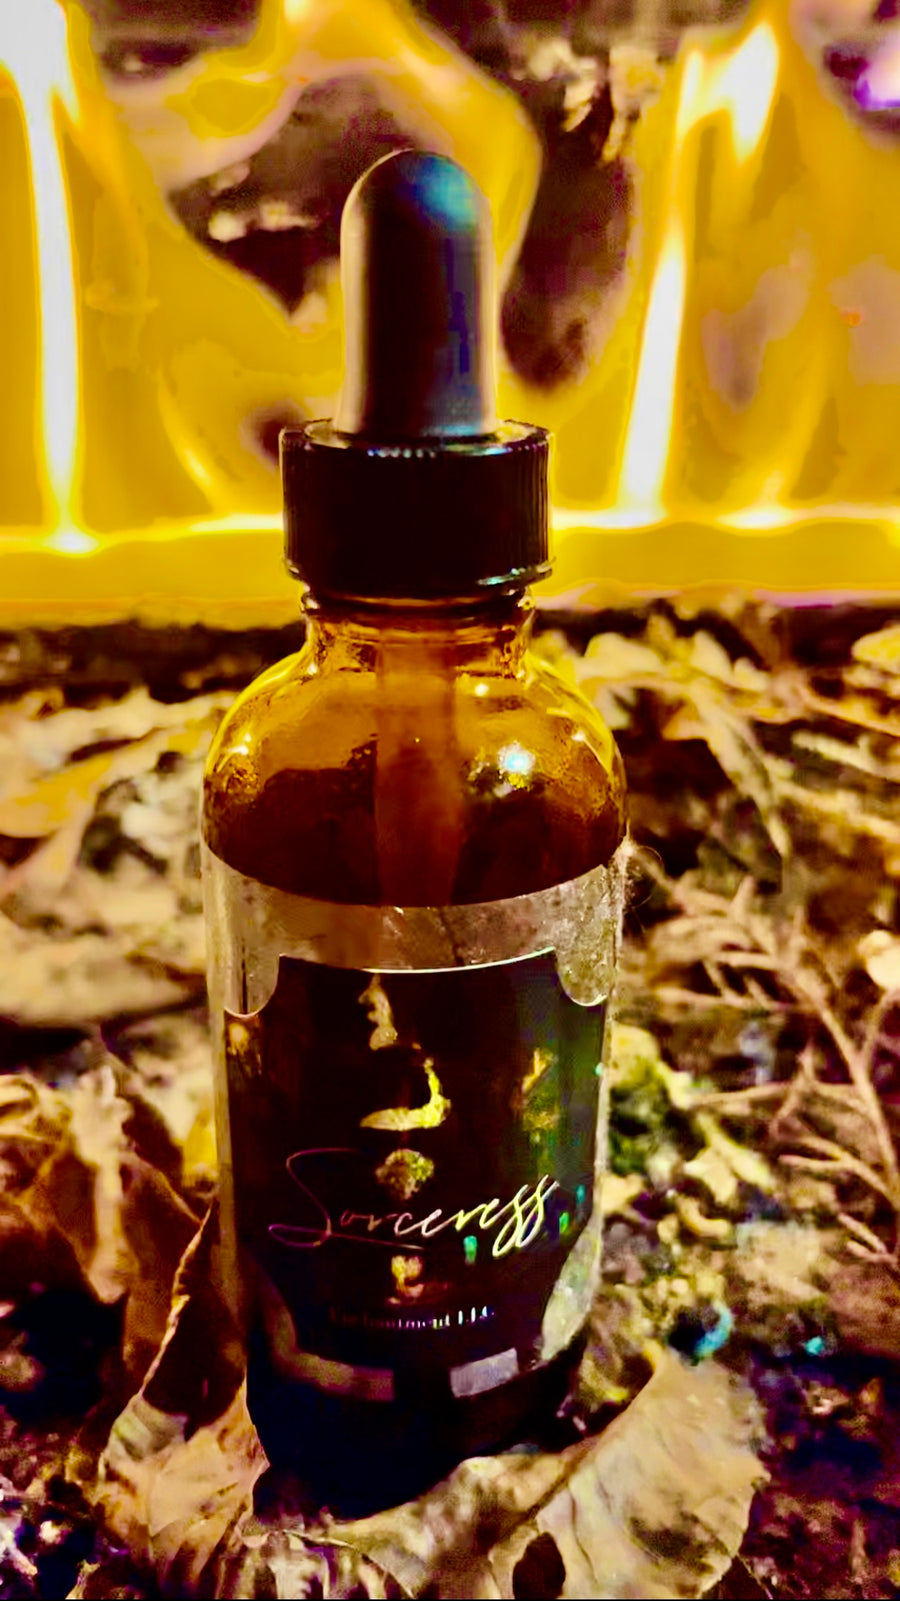 The Sorceress Tincture